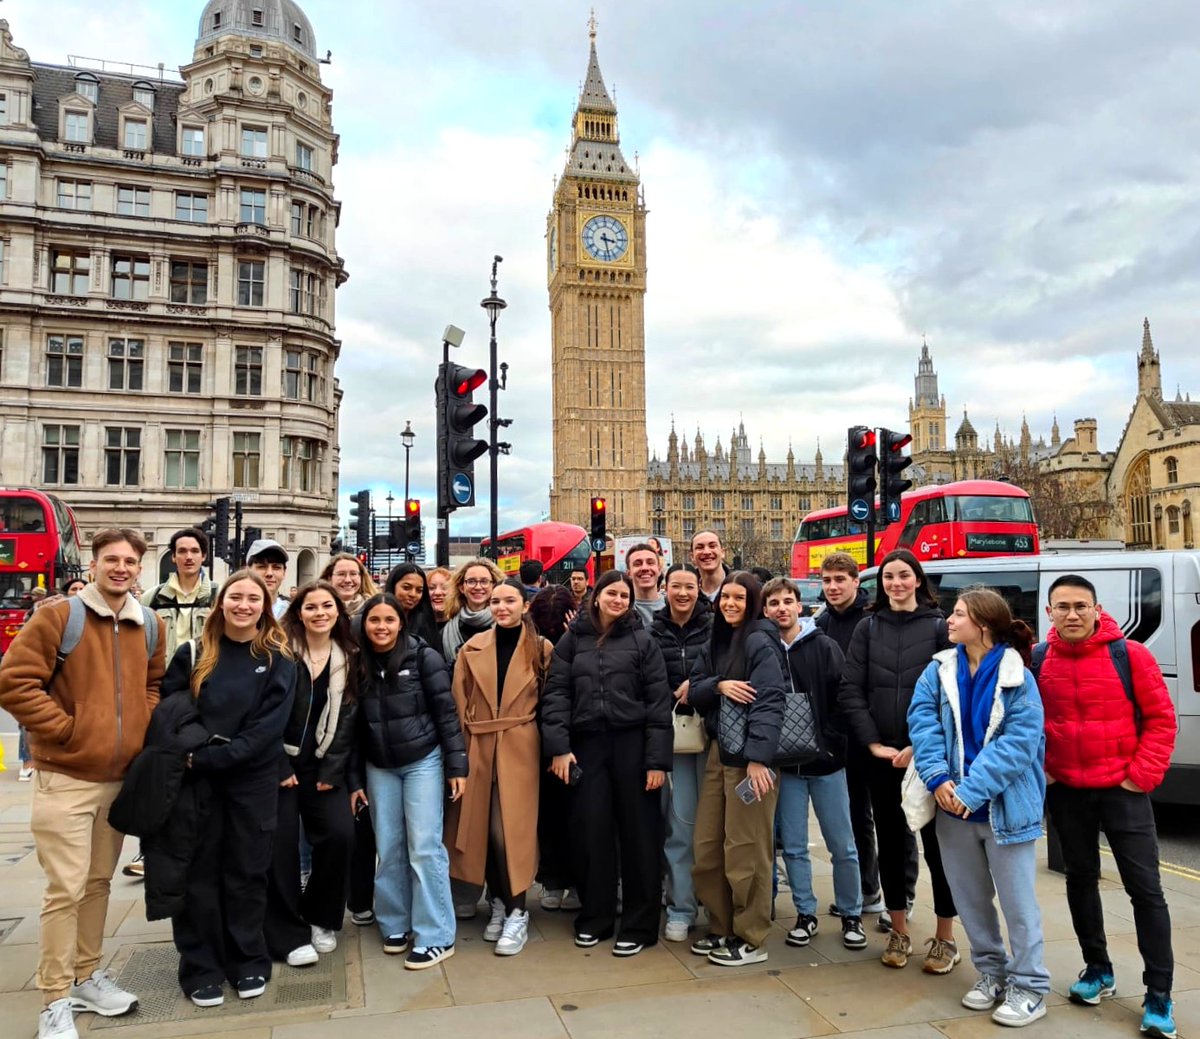 Our lovely students from Switzerland enjoyed the hustle and bustle of London this past Friday, and had a great time sightseeing all the main attractions that the capital has to offer 💂‍♂️🏙️🎡 #elcschools #elcbrighton #studyabroad #london #bigben